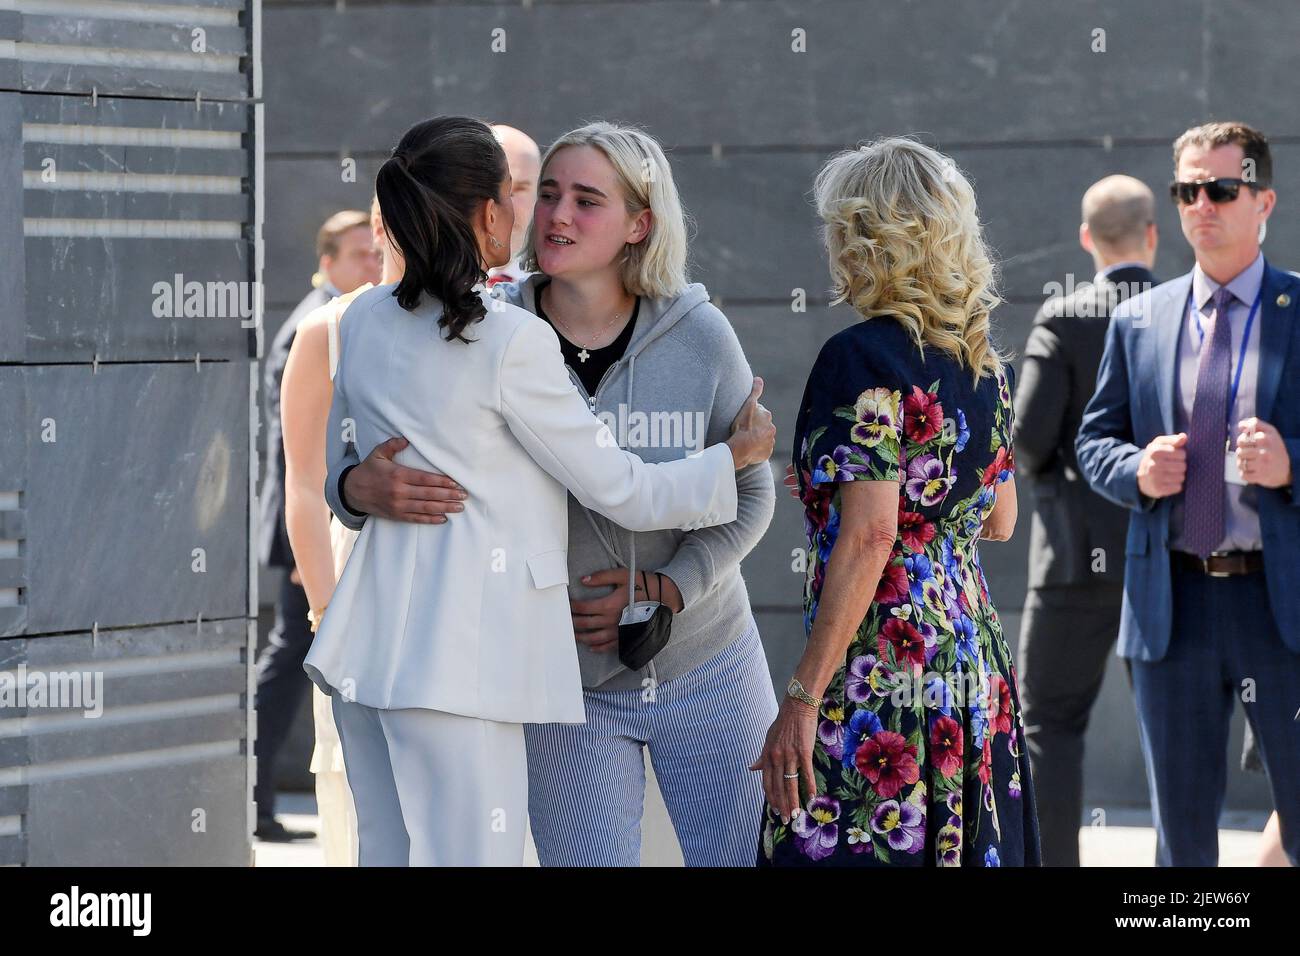 Spain's Queen Letizia welcomes U.S. first Lady Jill Biden and her granddaughters Finnegan and Maisy Biden, as they arrive for the visit of a reception centre for Ukrainian refugees in Pozuelo de Alarcon, on the sidelines of a NATO summit, near Madrid, Spain, June 28, 2022. Oscar del Pozo/Pool via REUTERS Stock Photo